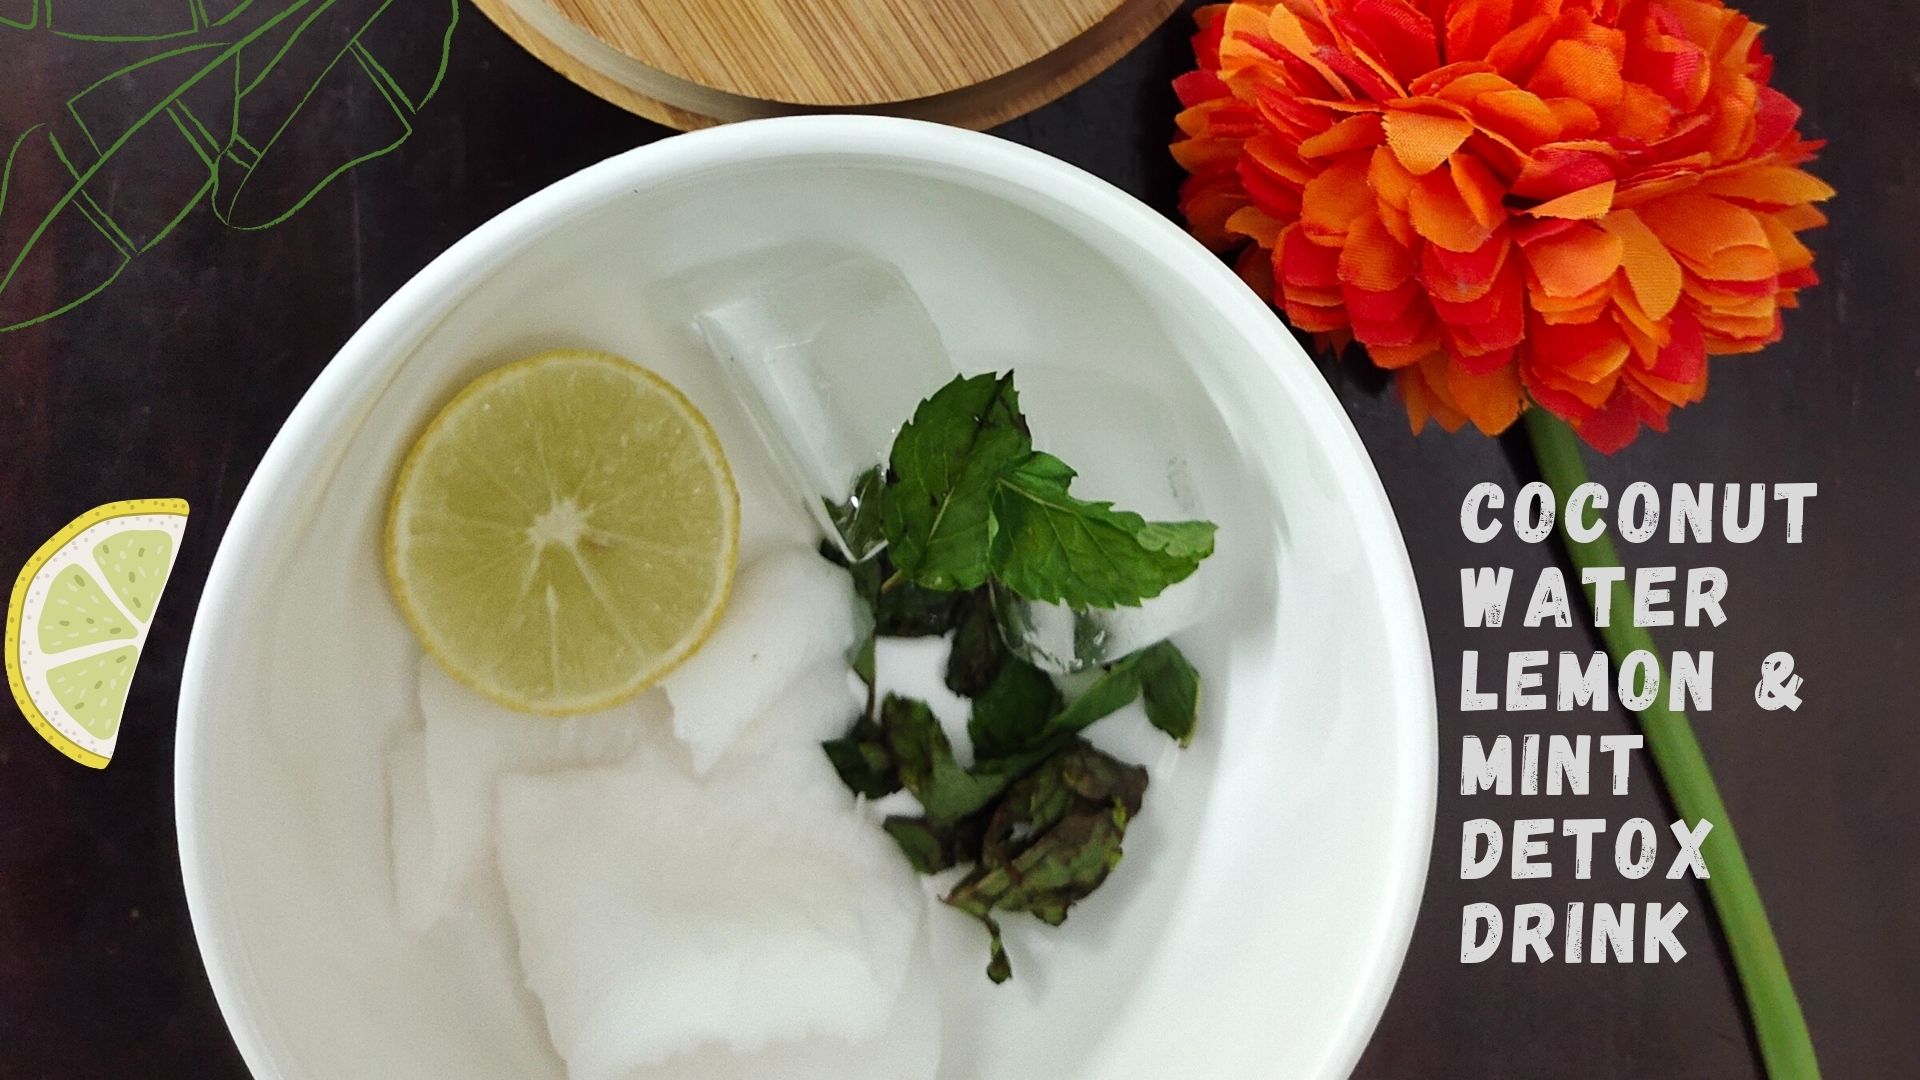 How to make Coconut water Mint detox drink?